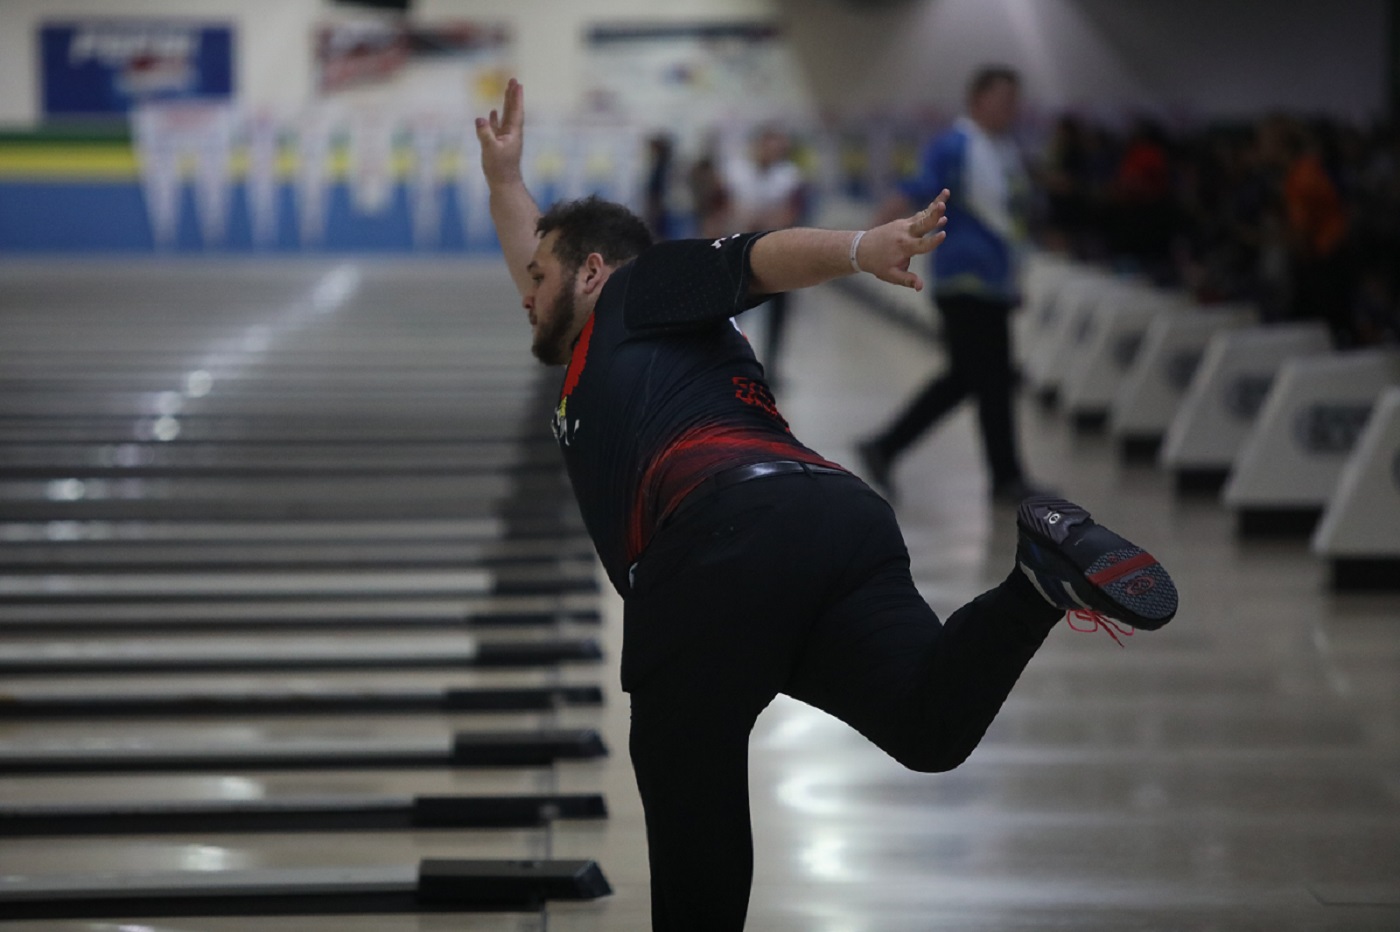 Men's bowling placed three bowlers in the top 10 to take 2nd overall